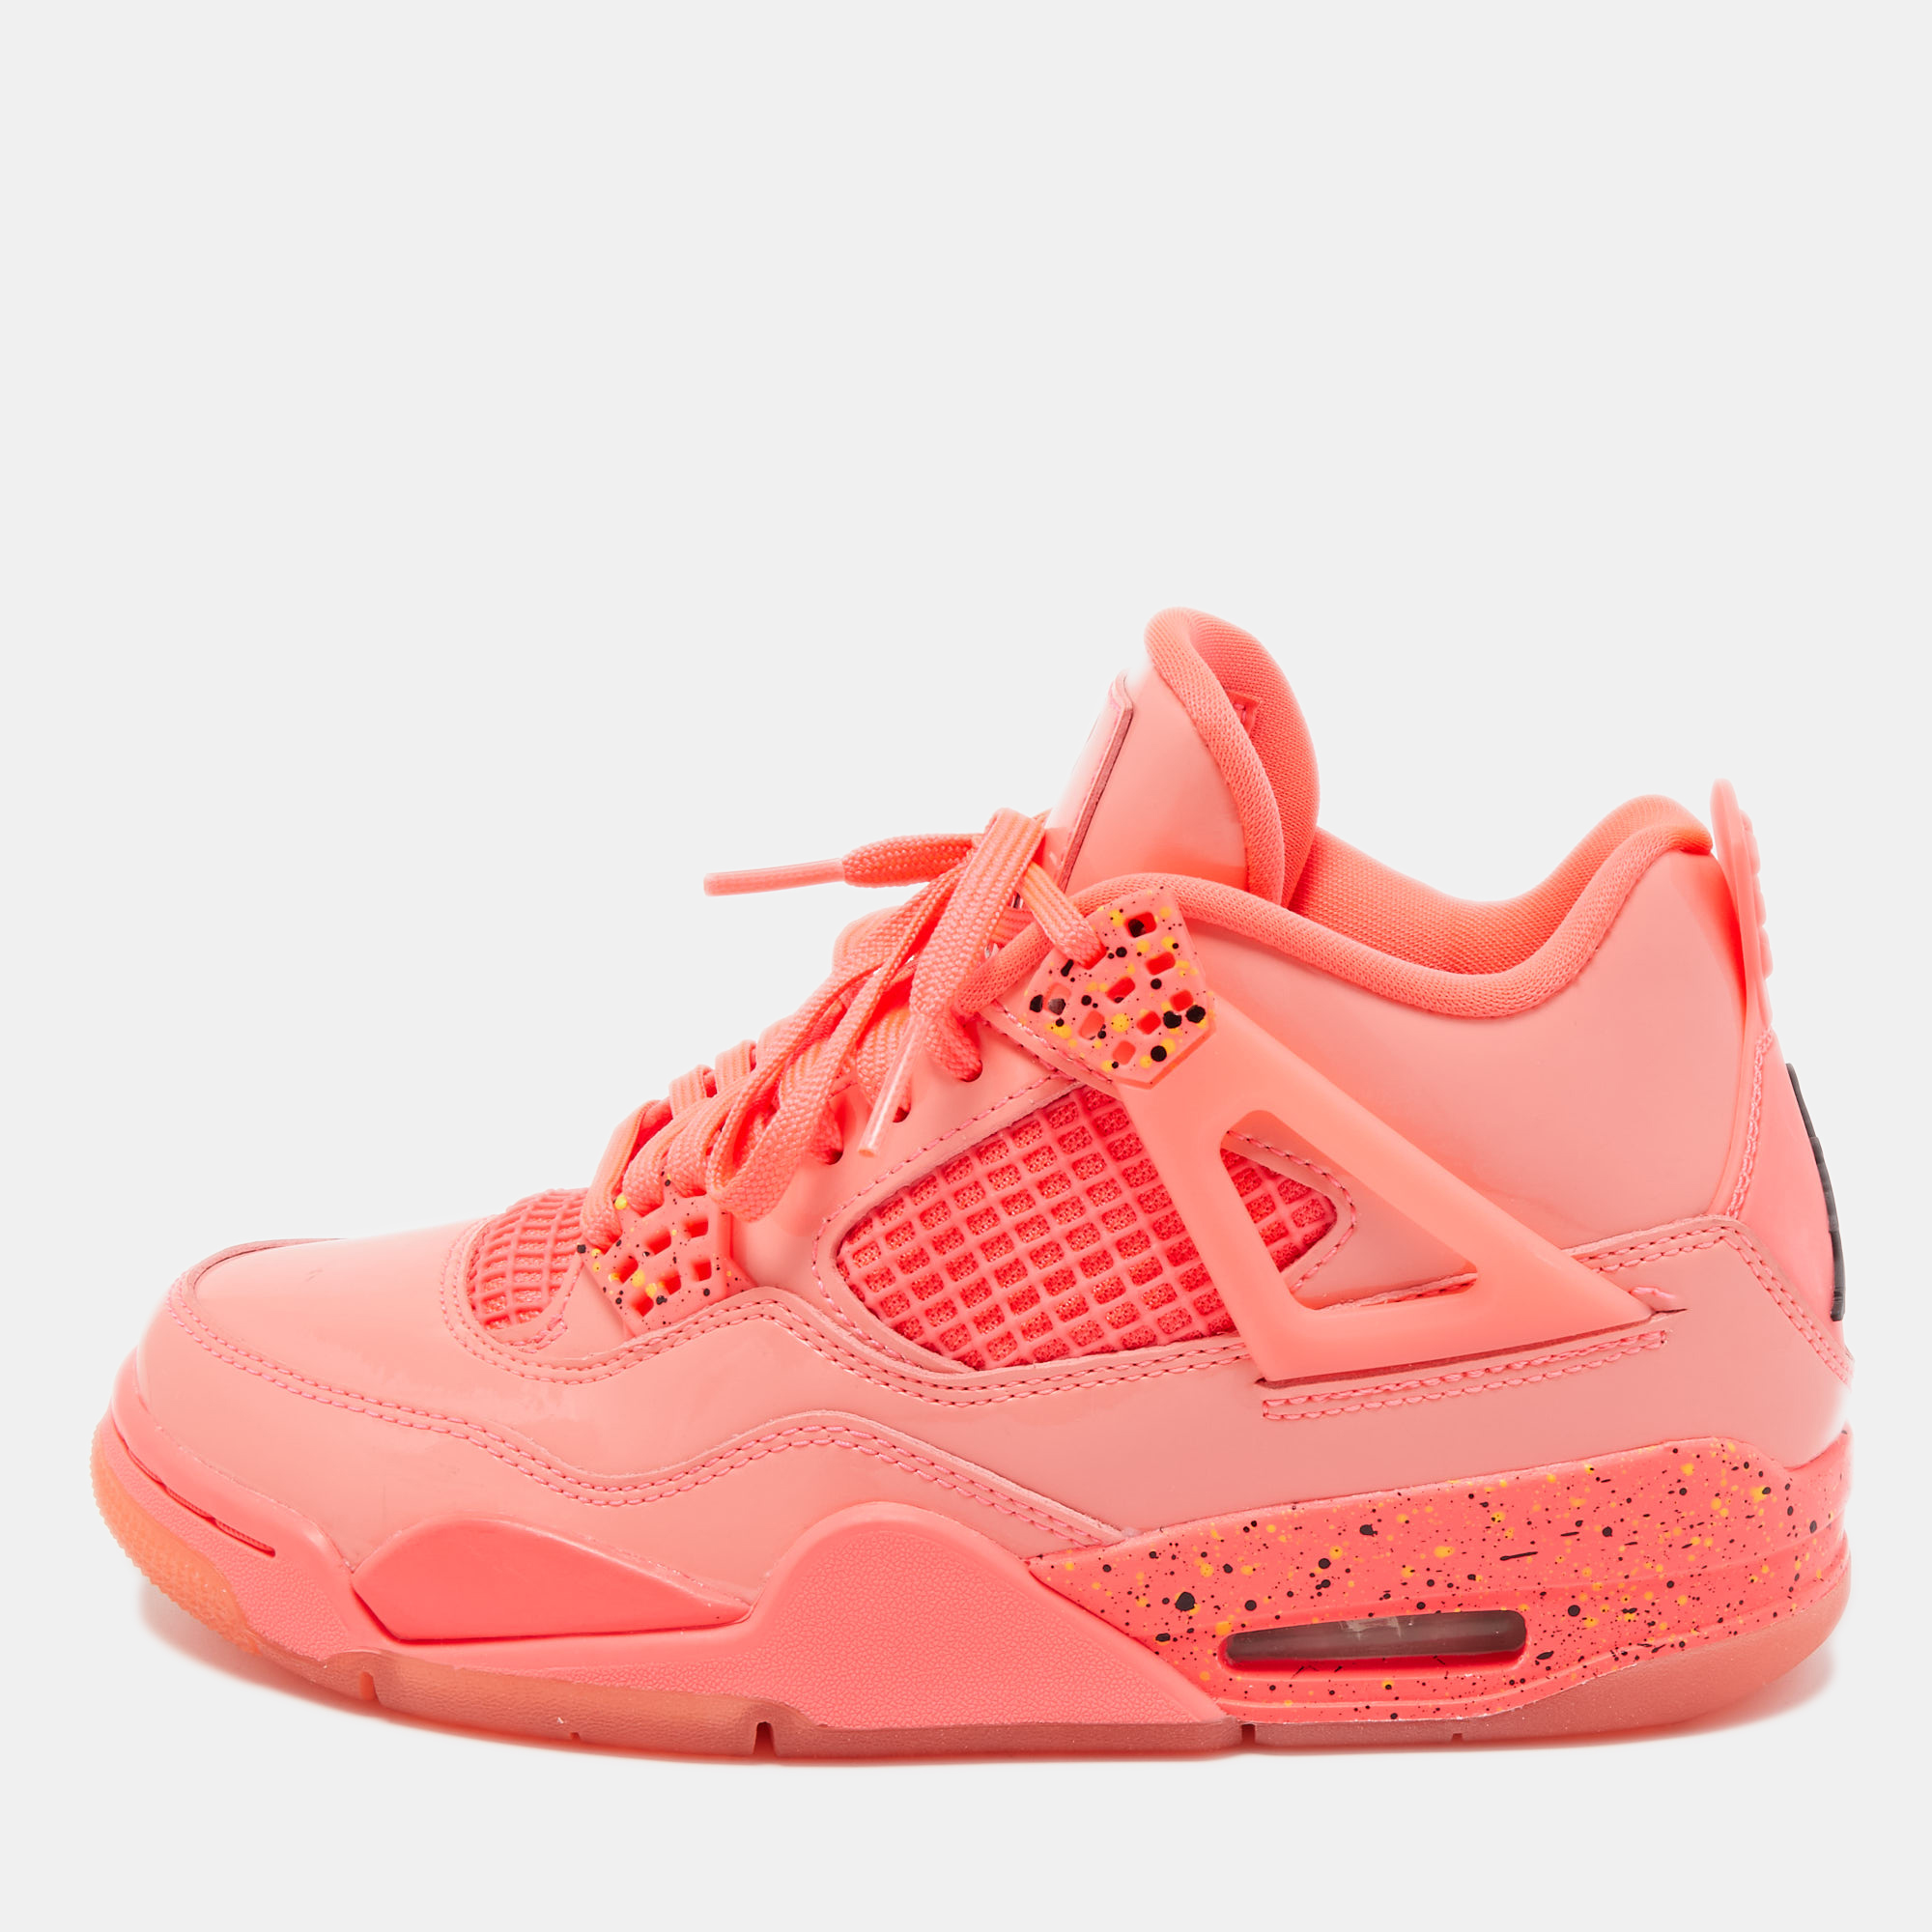 Pre-owned Air Jordans Neon Pink Patent Leather Jordan 4 Hot Punch Sneakers Size 36.5